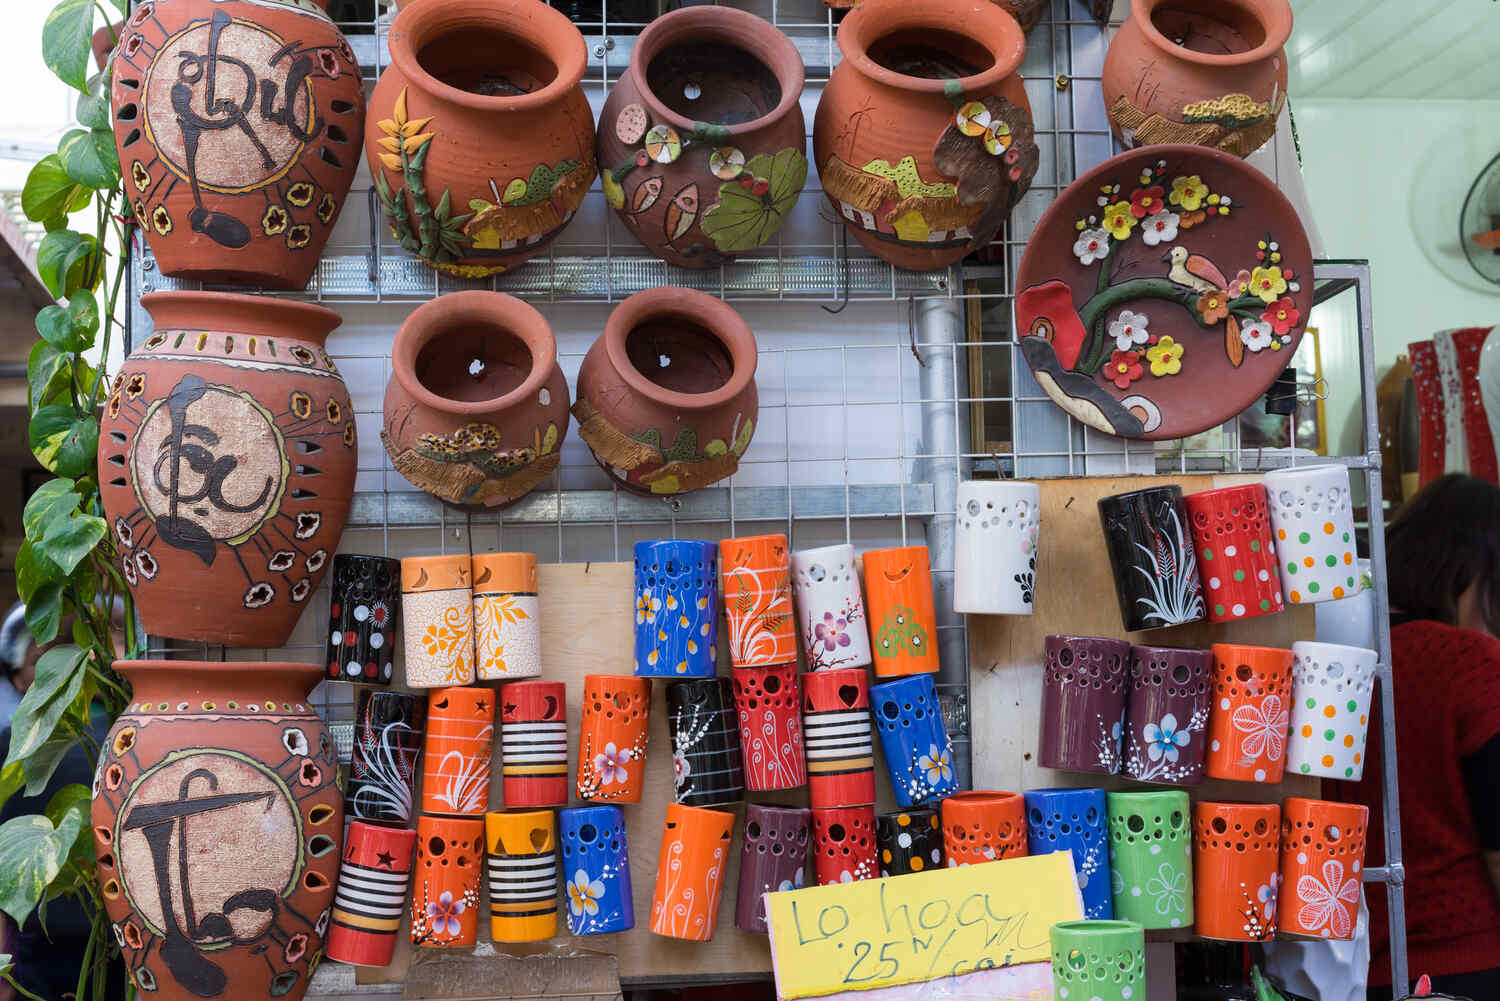 Colorfully painted ceramic pots and plates displayed on a wall in a vibrant outdoor market.